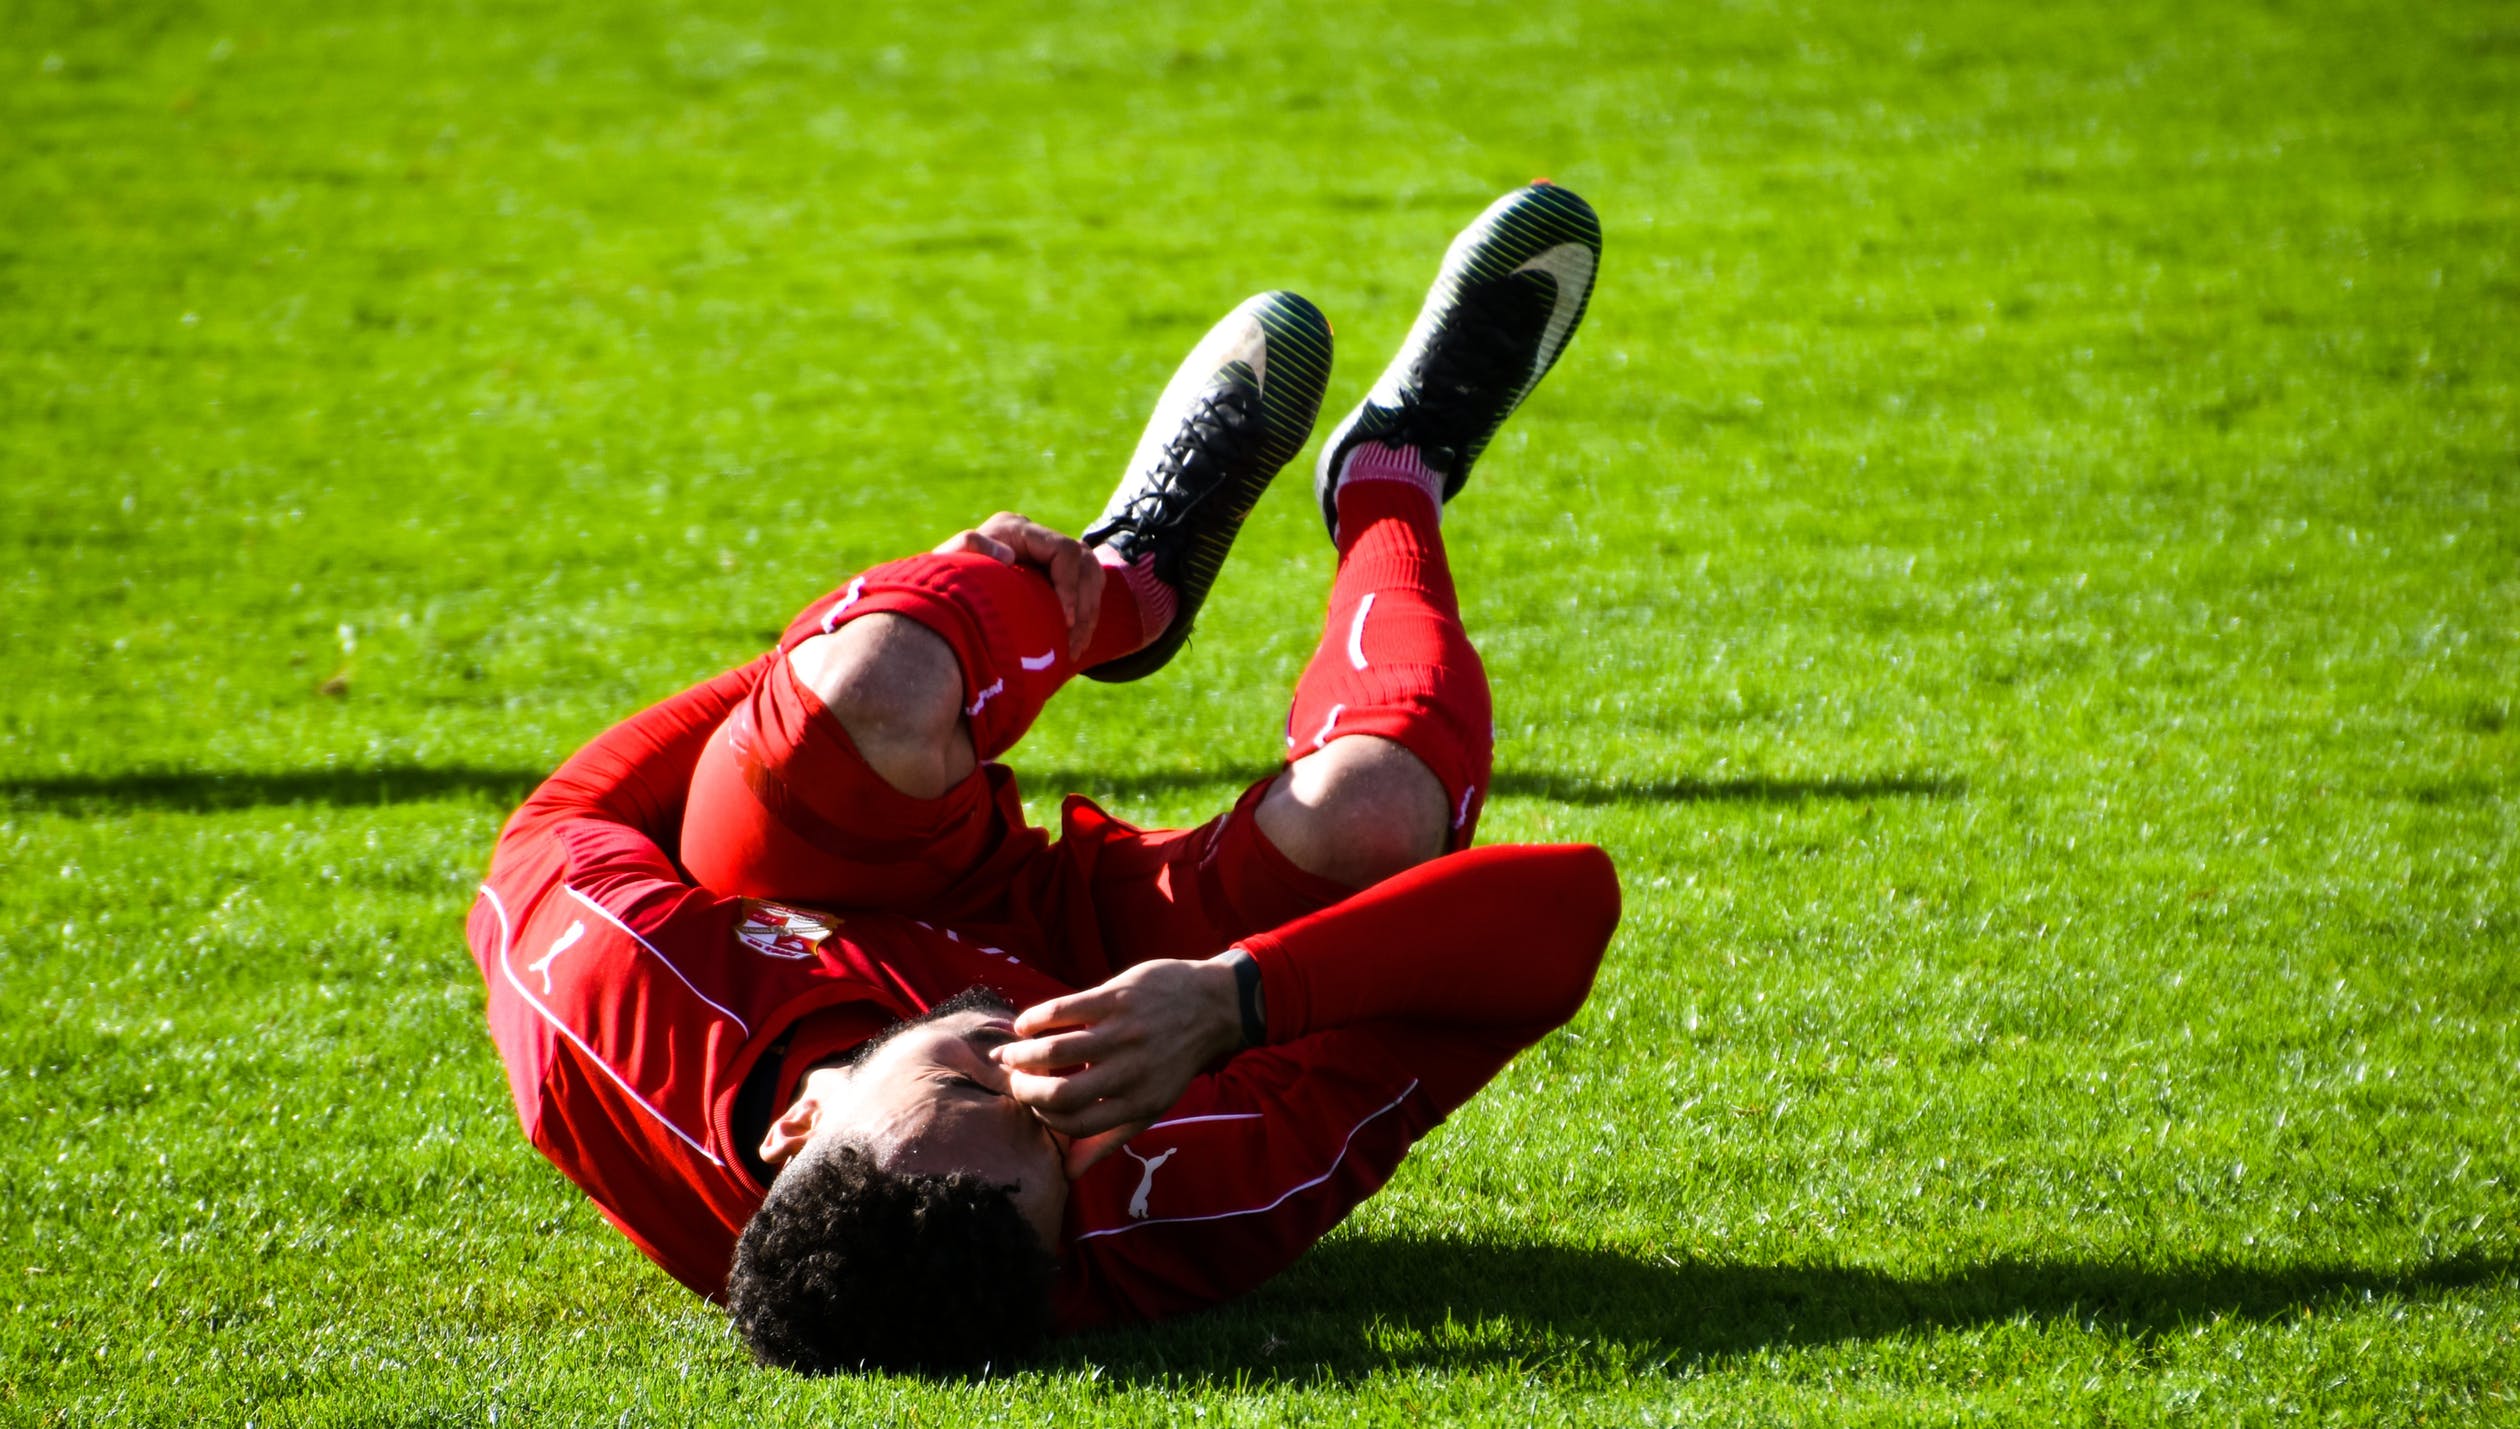 soccer player faking injury on field